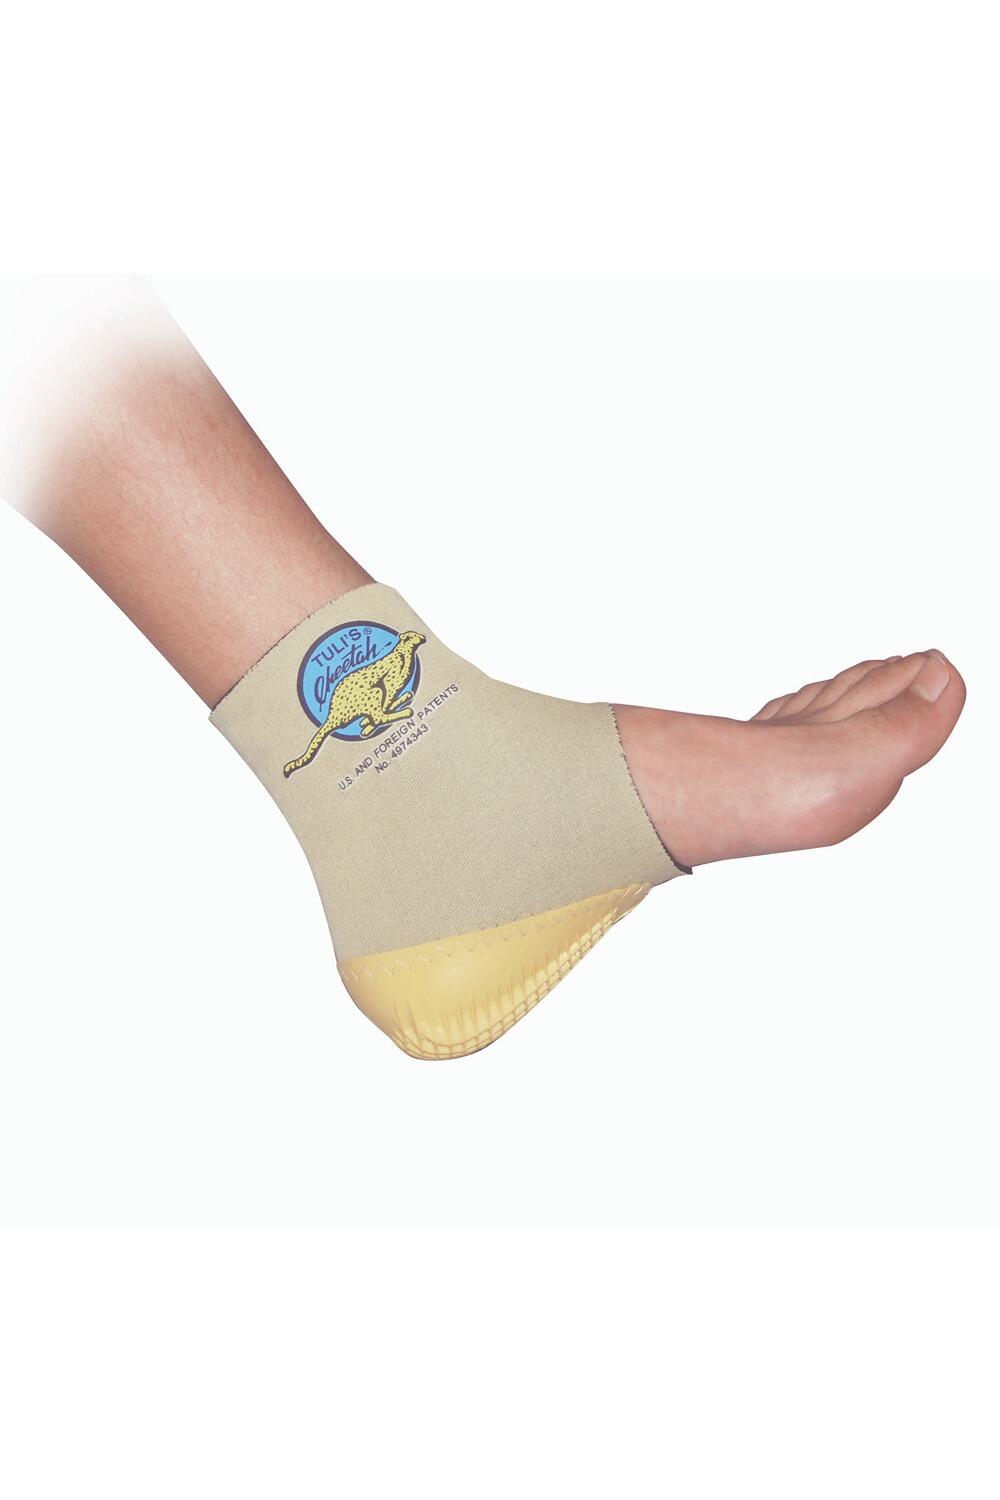 TULI'S Cheetahs Ankle Support with Heel Cup